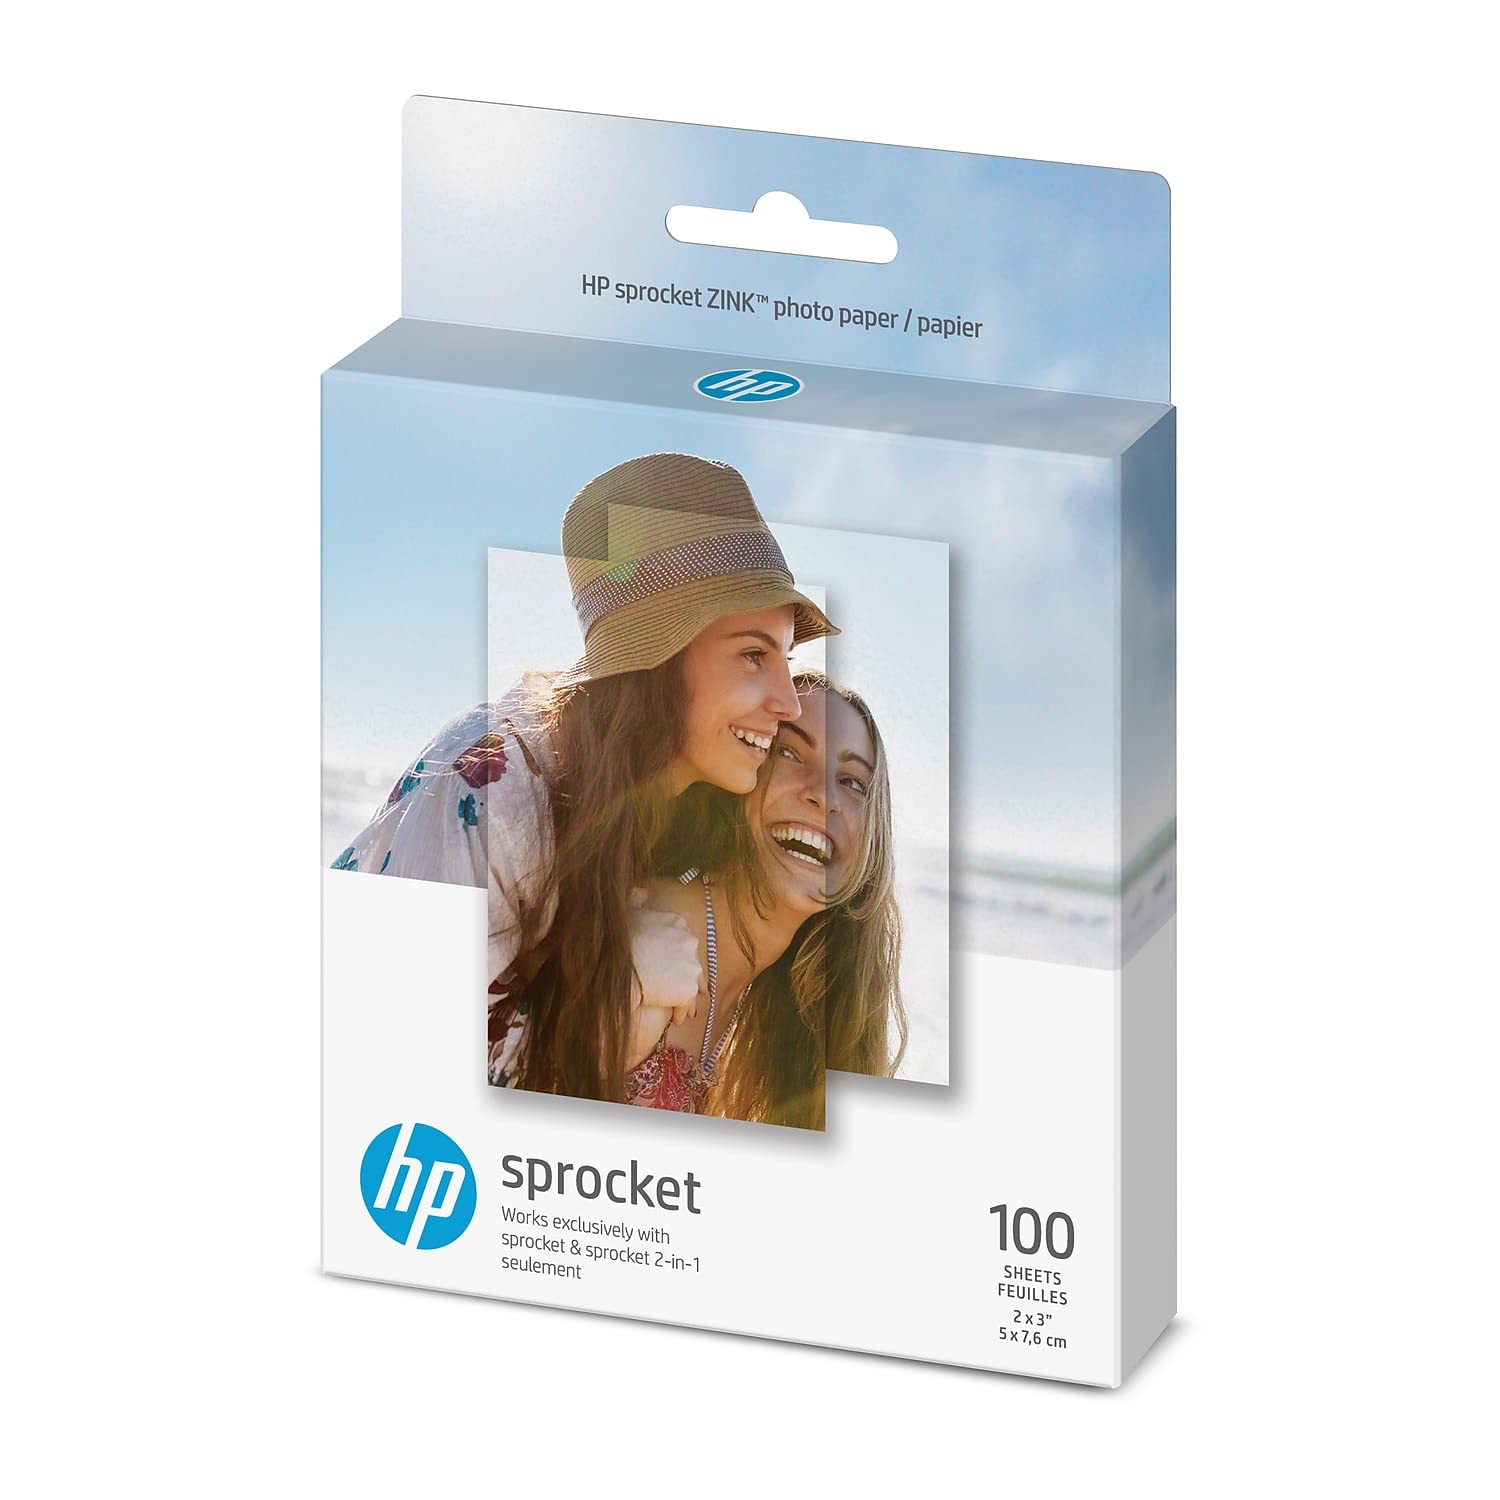 HP Sprocket Photo Paper, exclusively for Sprocket or Sprocket 2-in-1 Printer, (2x3-inch), sticky-backed 100 sheets (1DE40A)